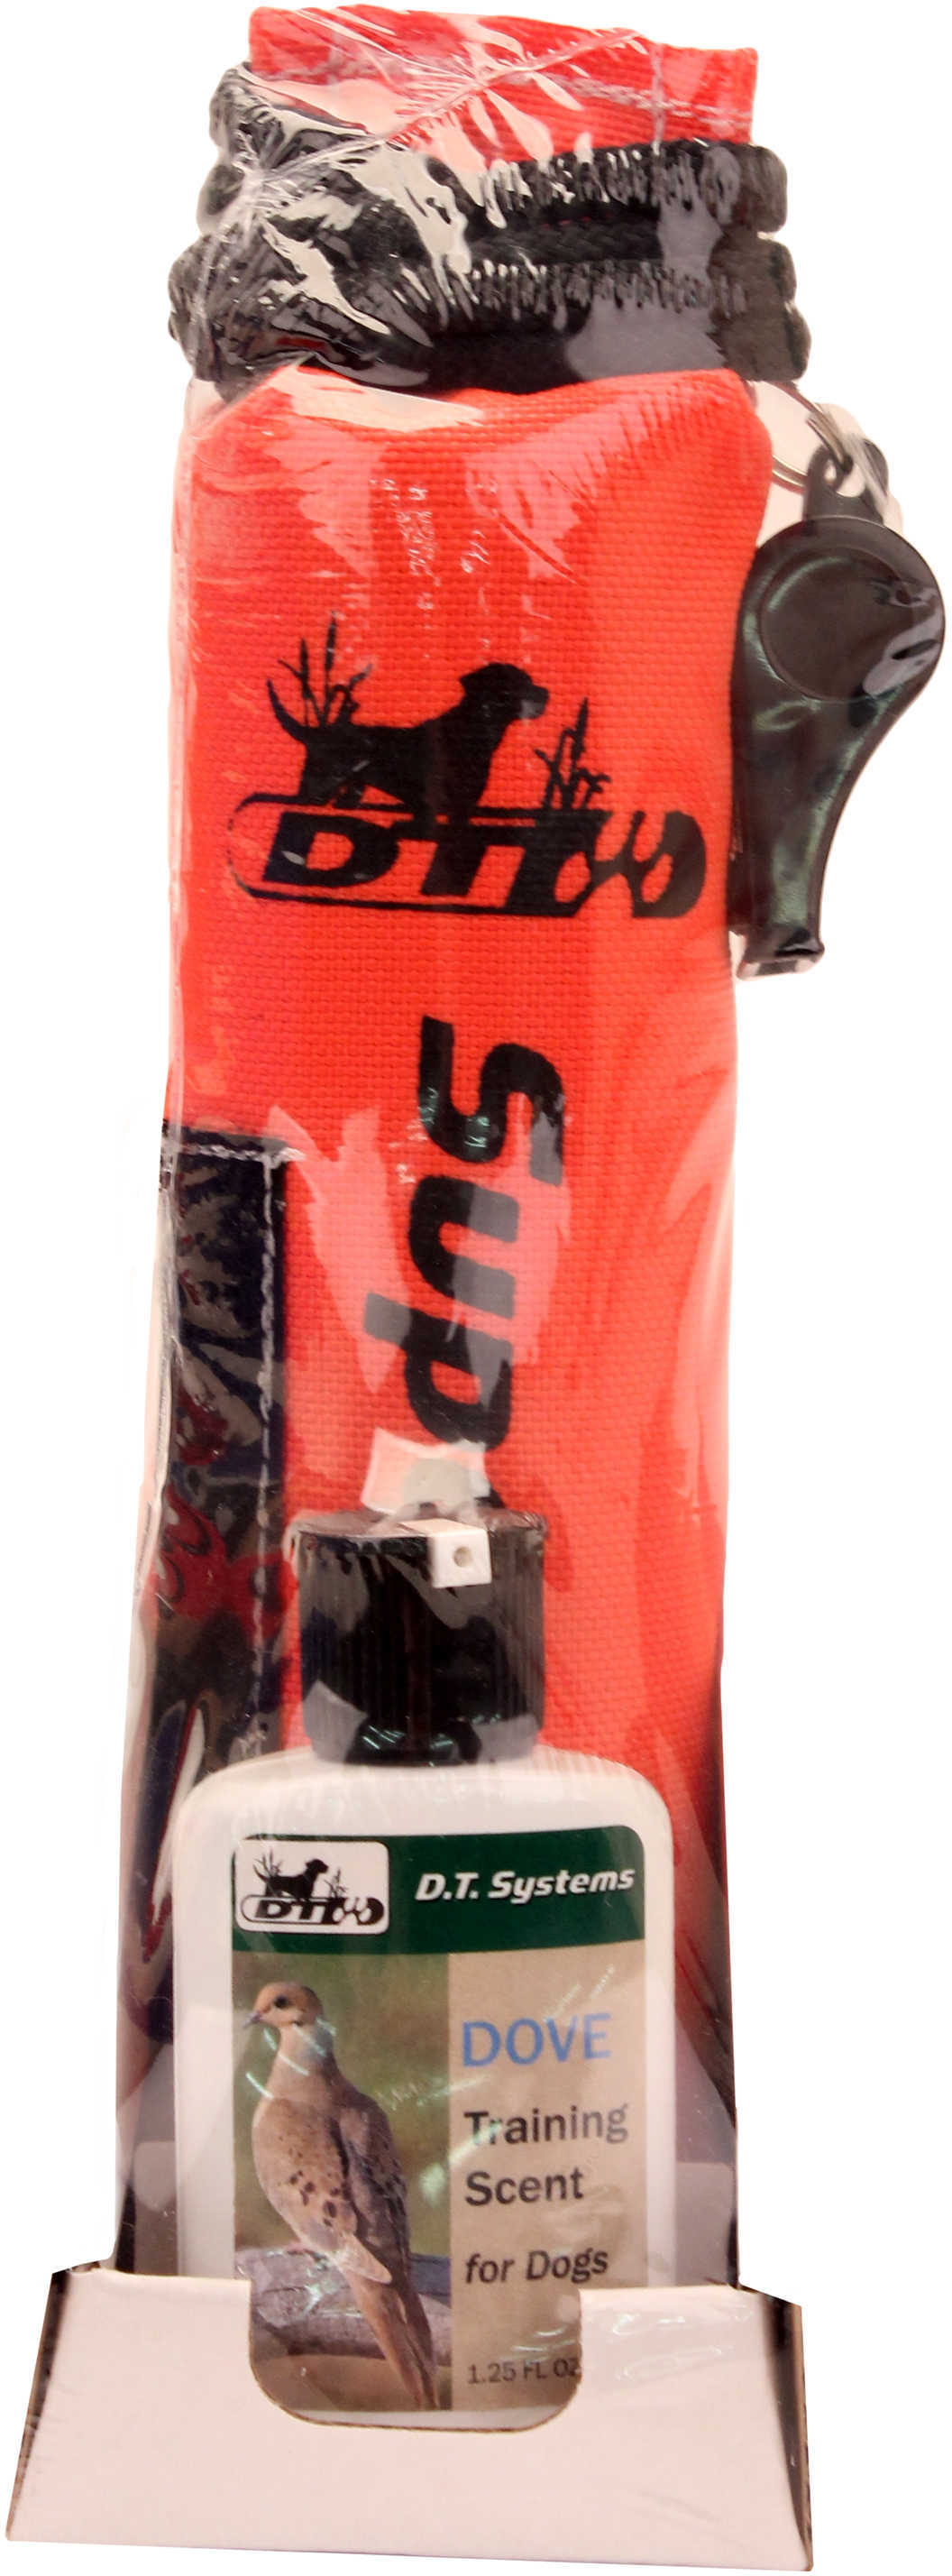 DT Systems Large Nylon Orange Dummy with Scent Dove Md: 74206